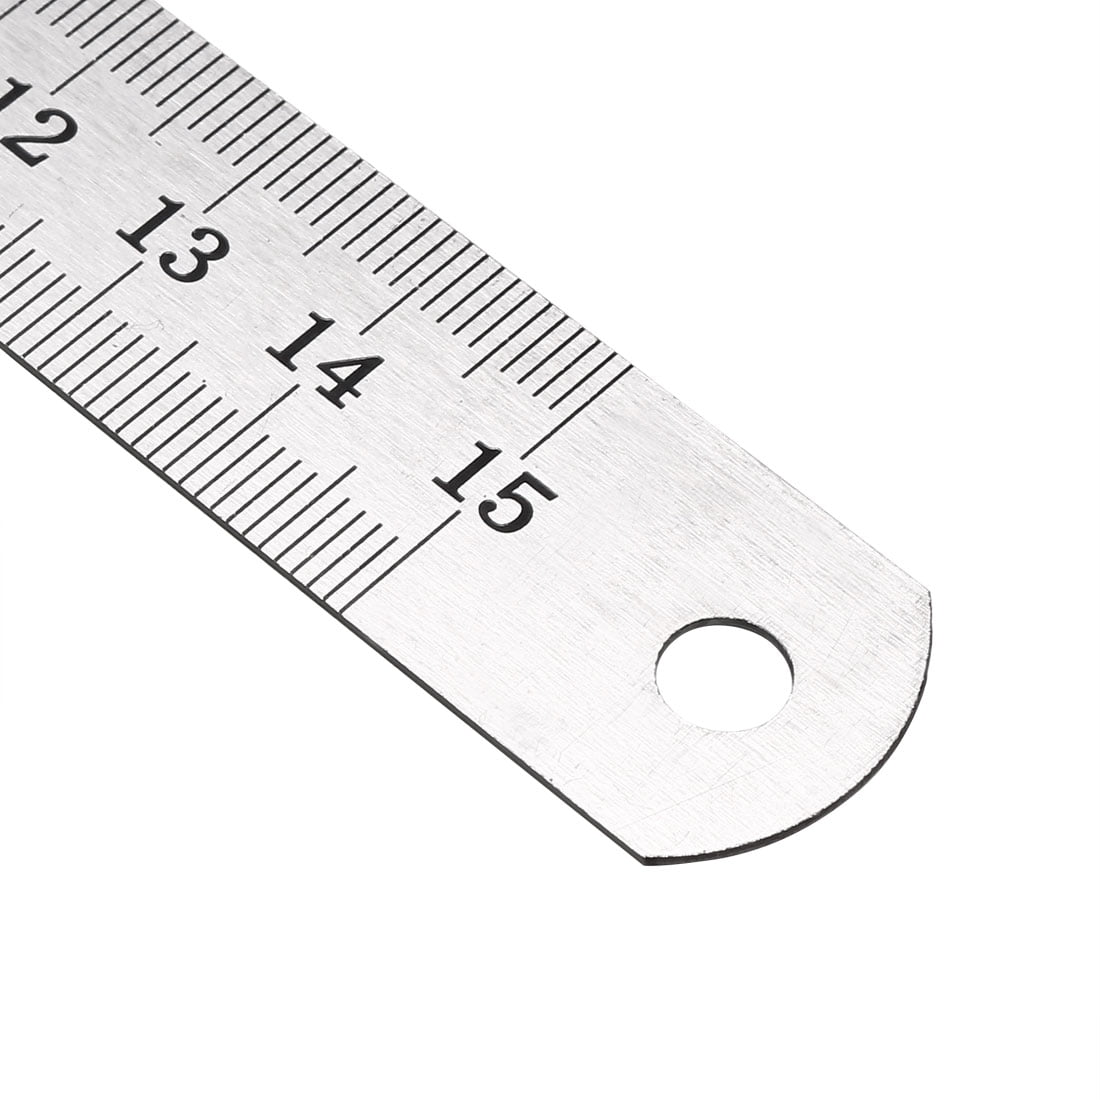 Utoolmart Straight Ruler 150mm 6 inch Metric Stainless Steel Ruler Measuring Tool with Hanging Hole 5pcs 